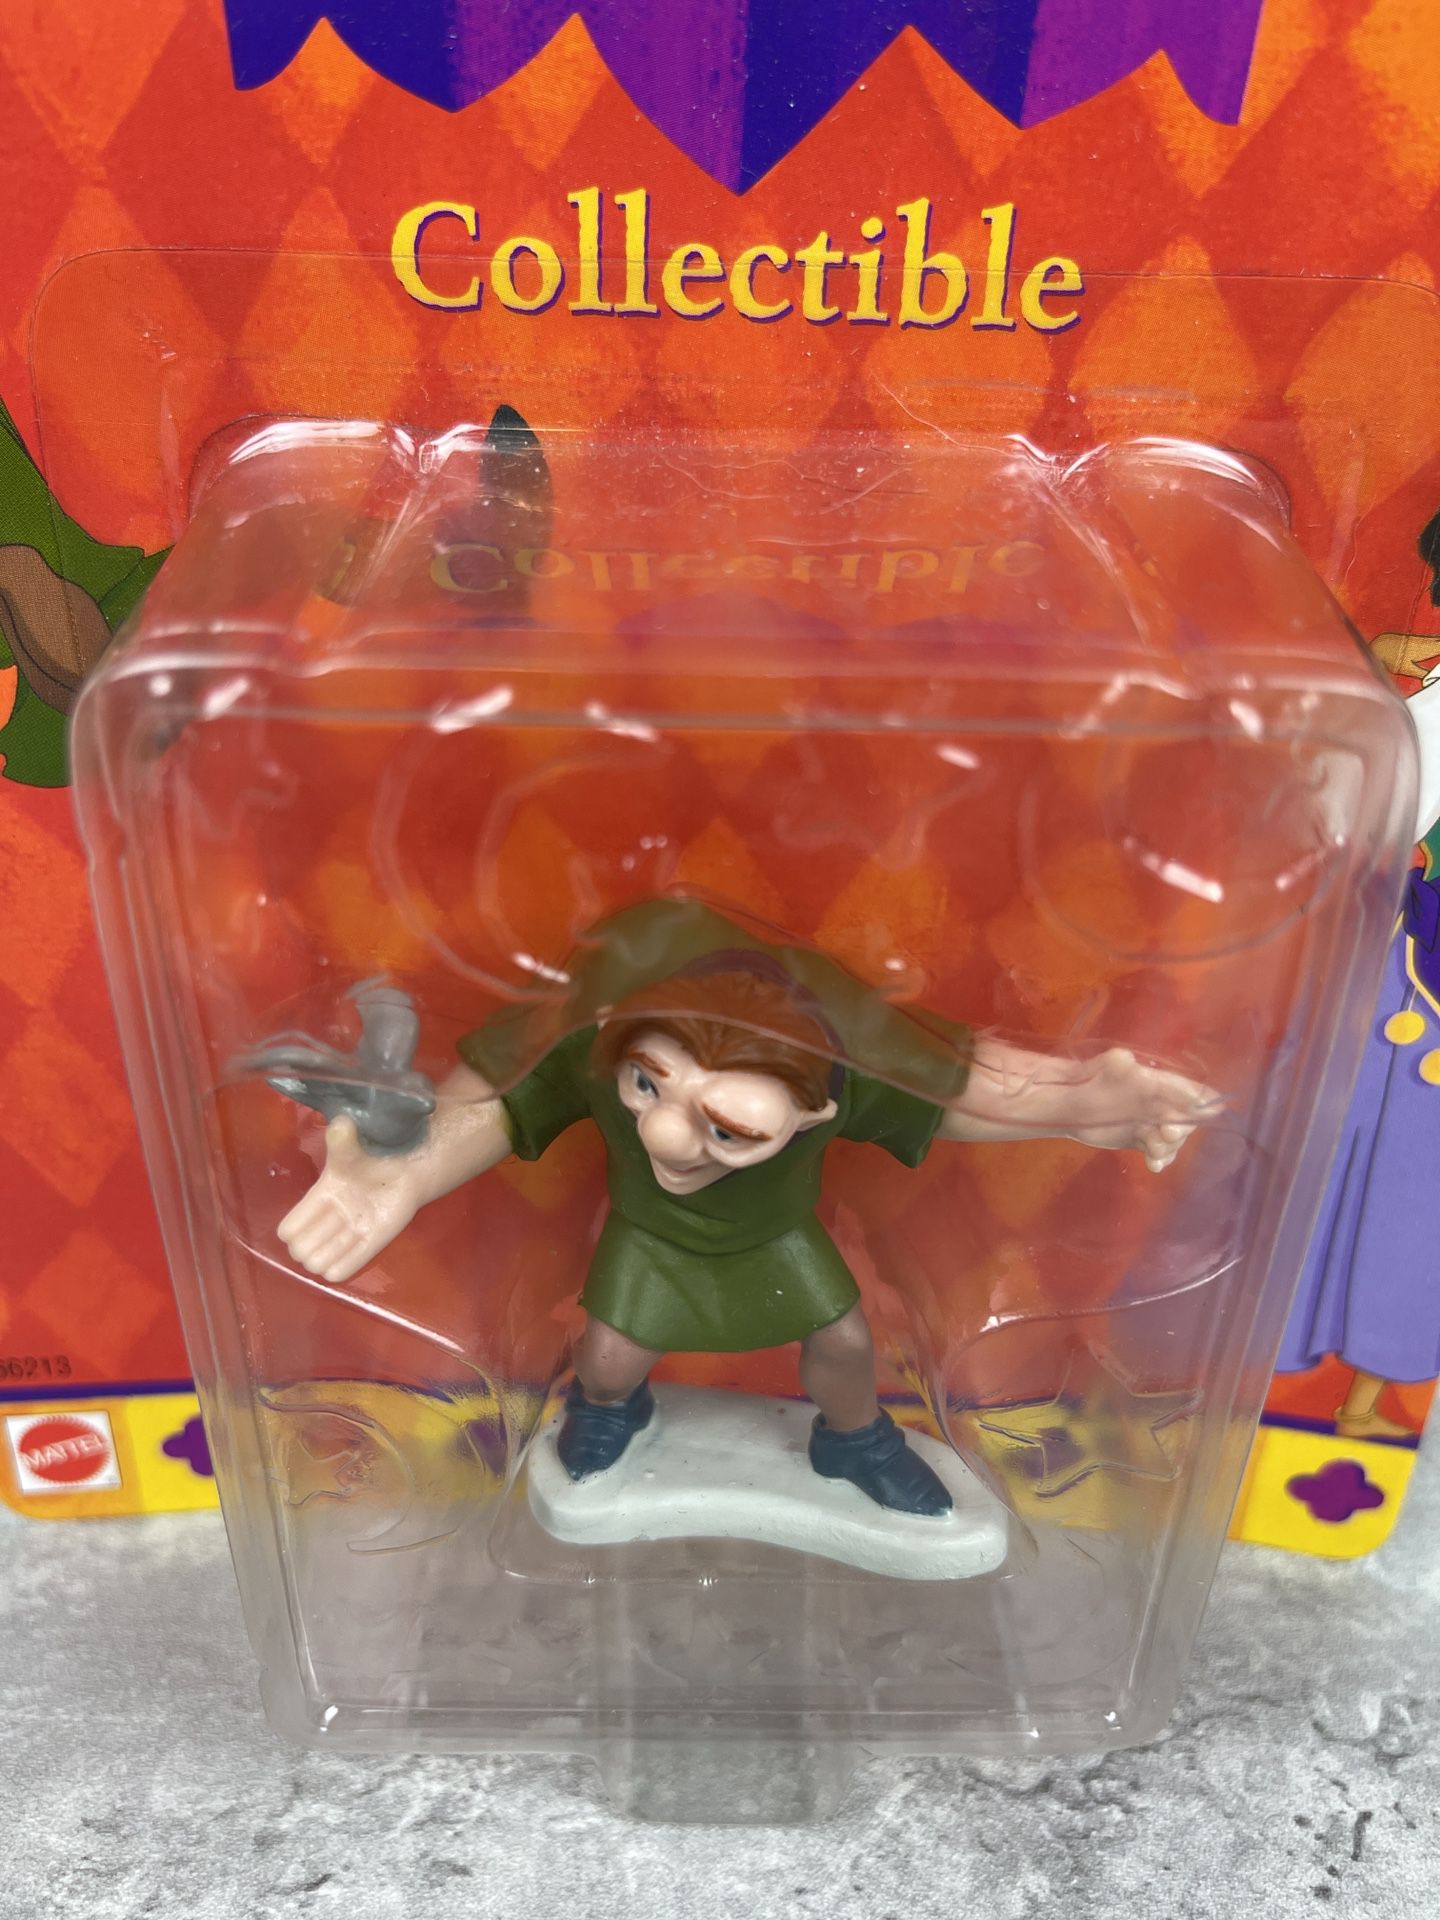 Disney’s Collectible Hunchback Of Notre Dame